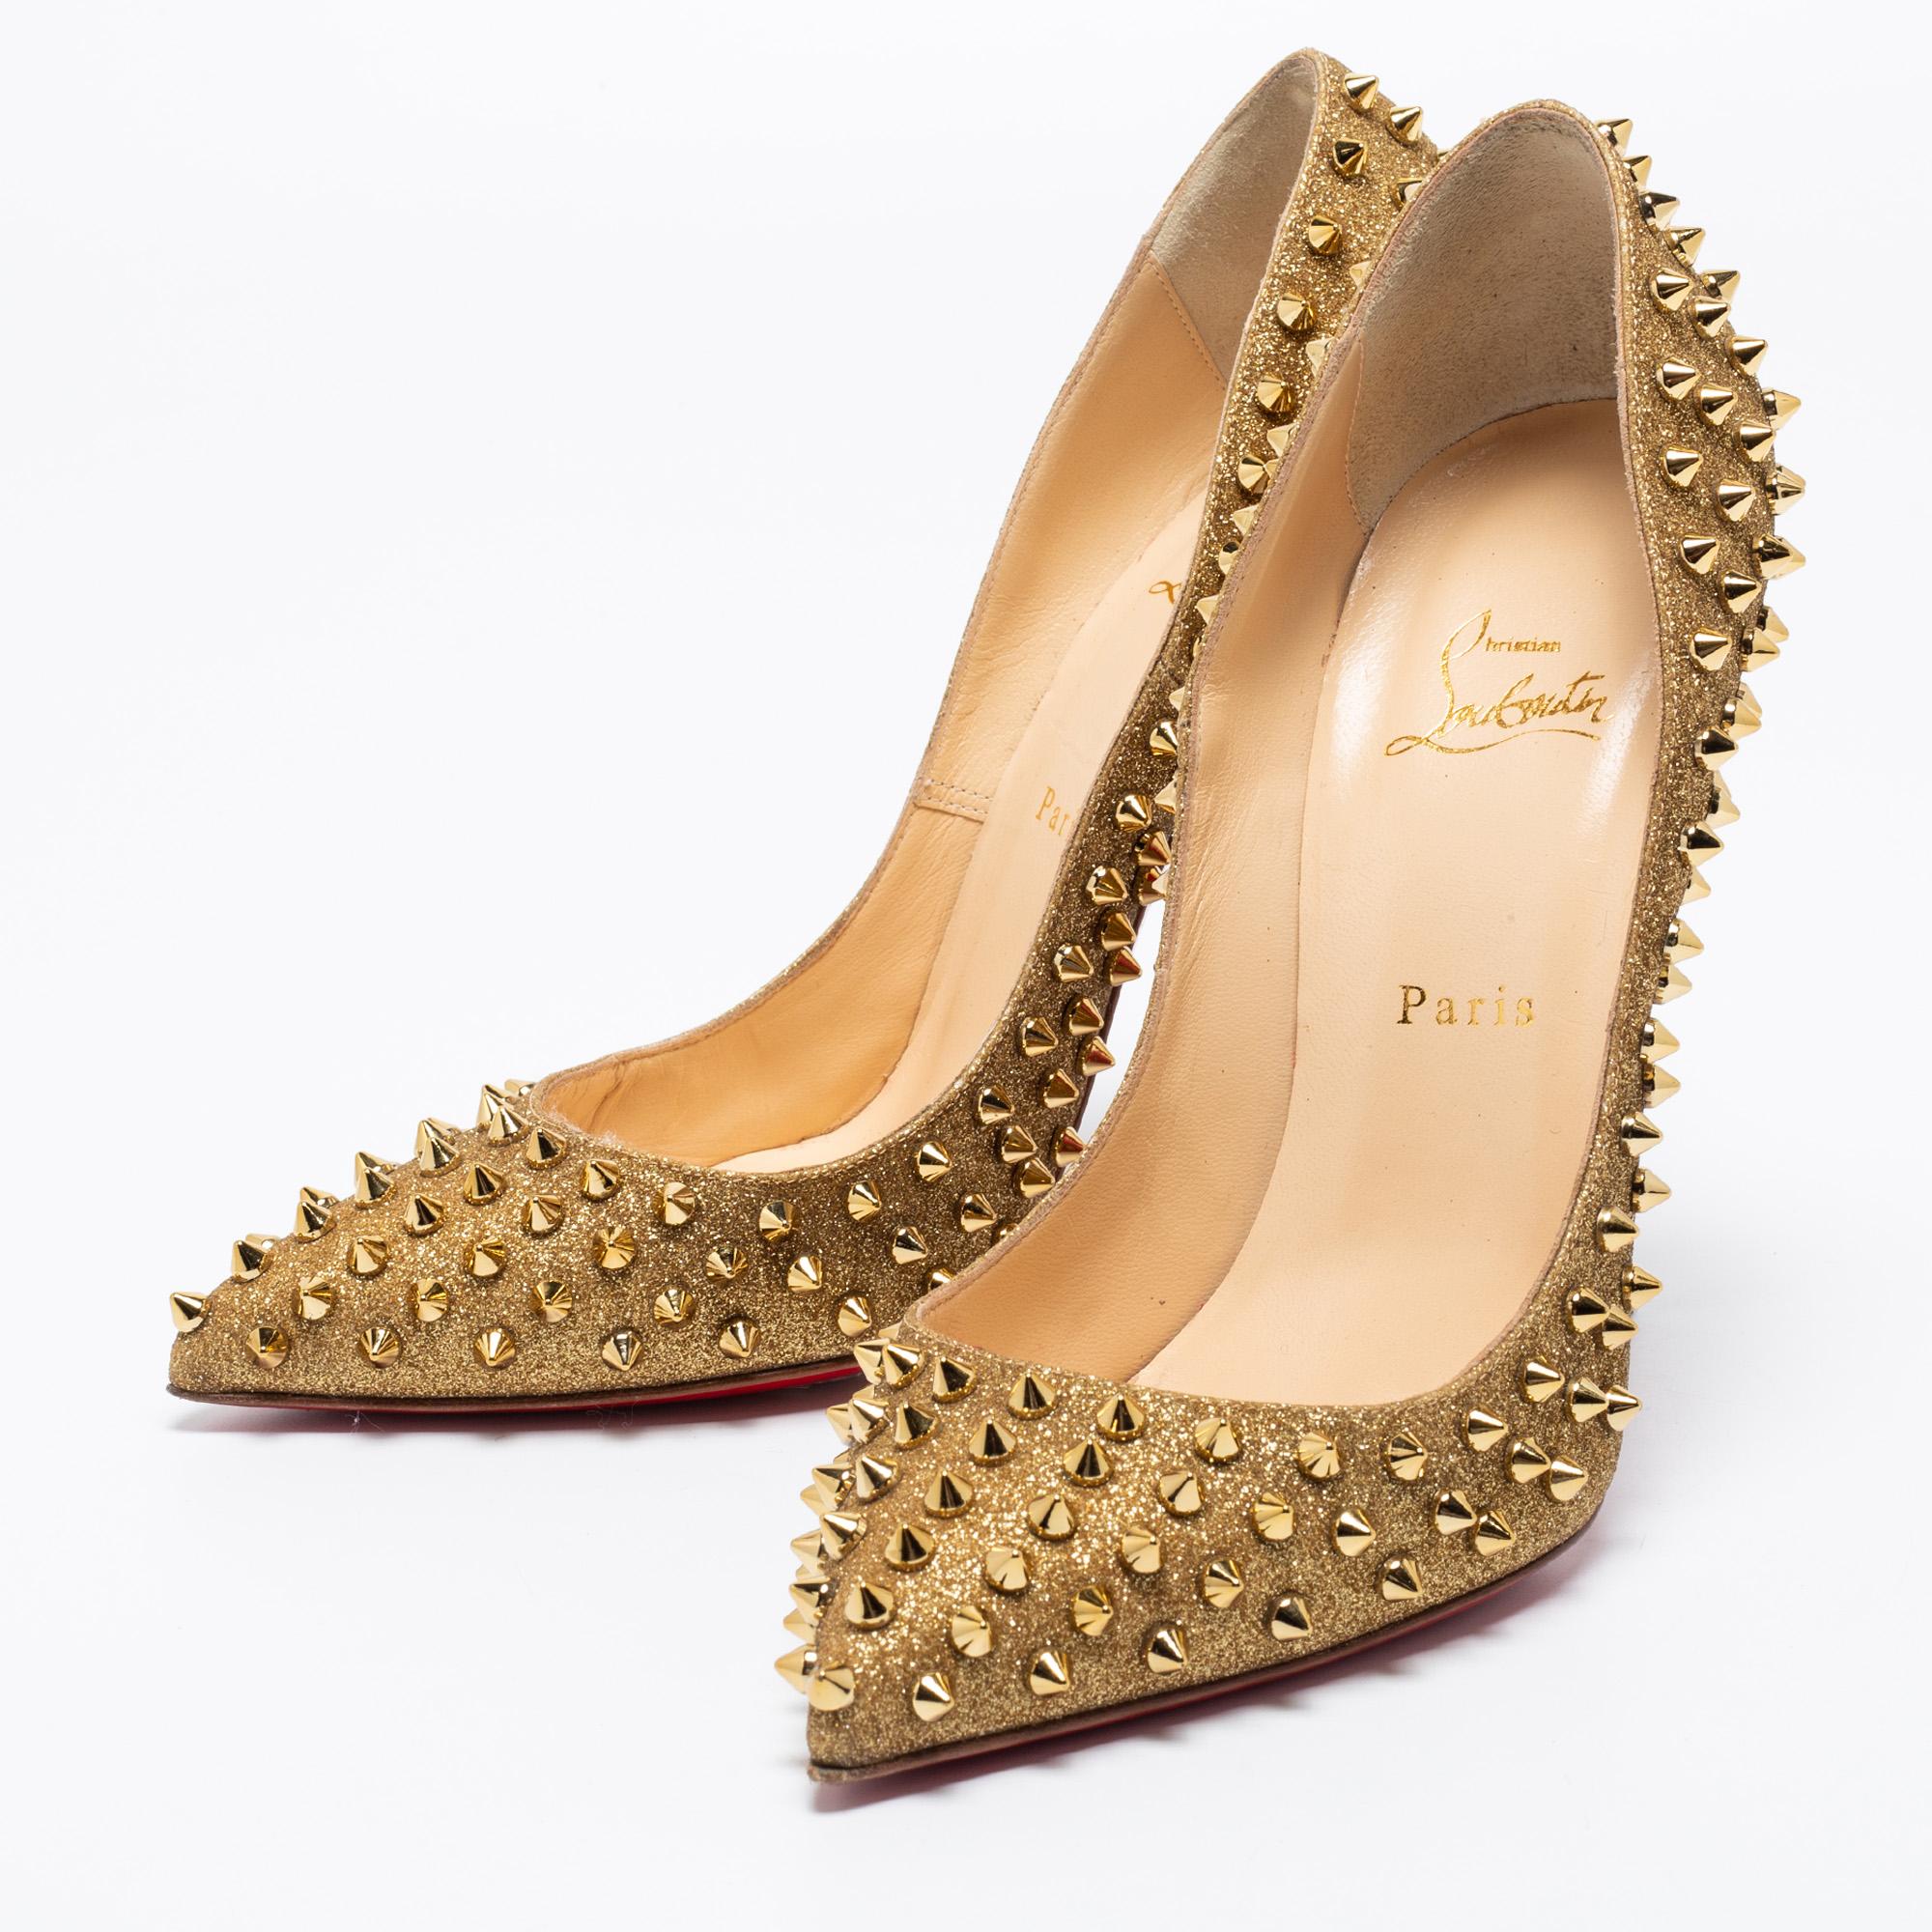 Amaze the crowds and make a statement like never before in these gorgeous pumps from Christian Louboutin! The gold-hued pumps have been covered using glitter into a pointed-toe style. They are exquisitely embellished with spikes on the exterior and